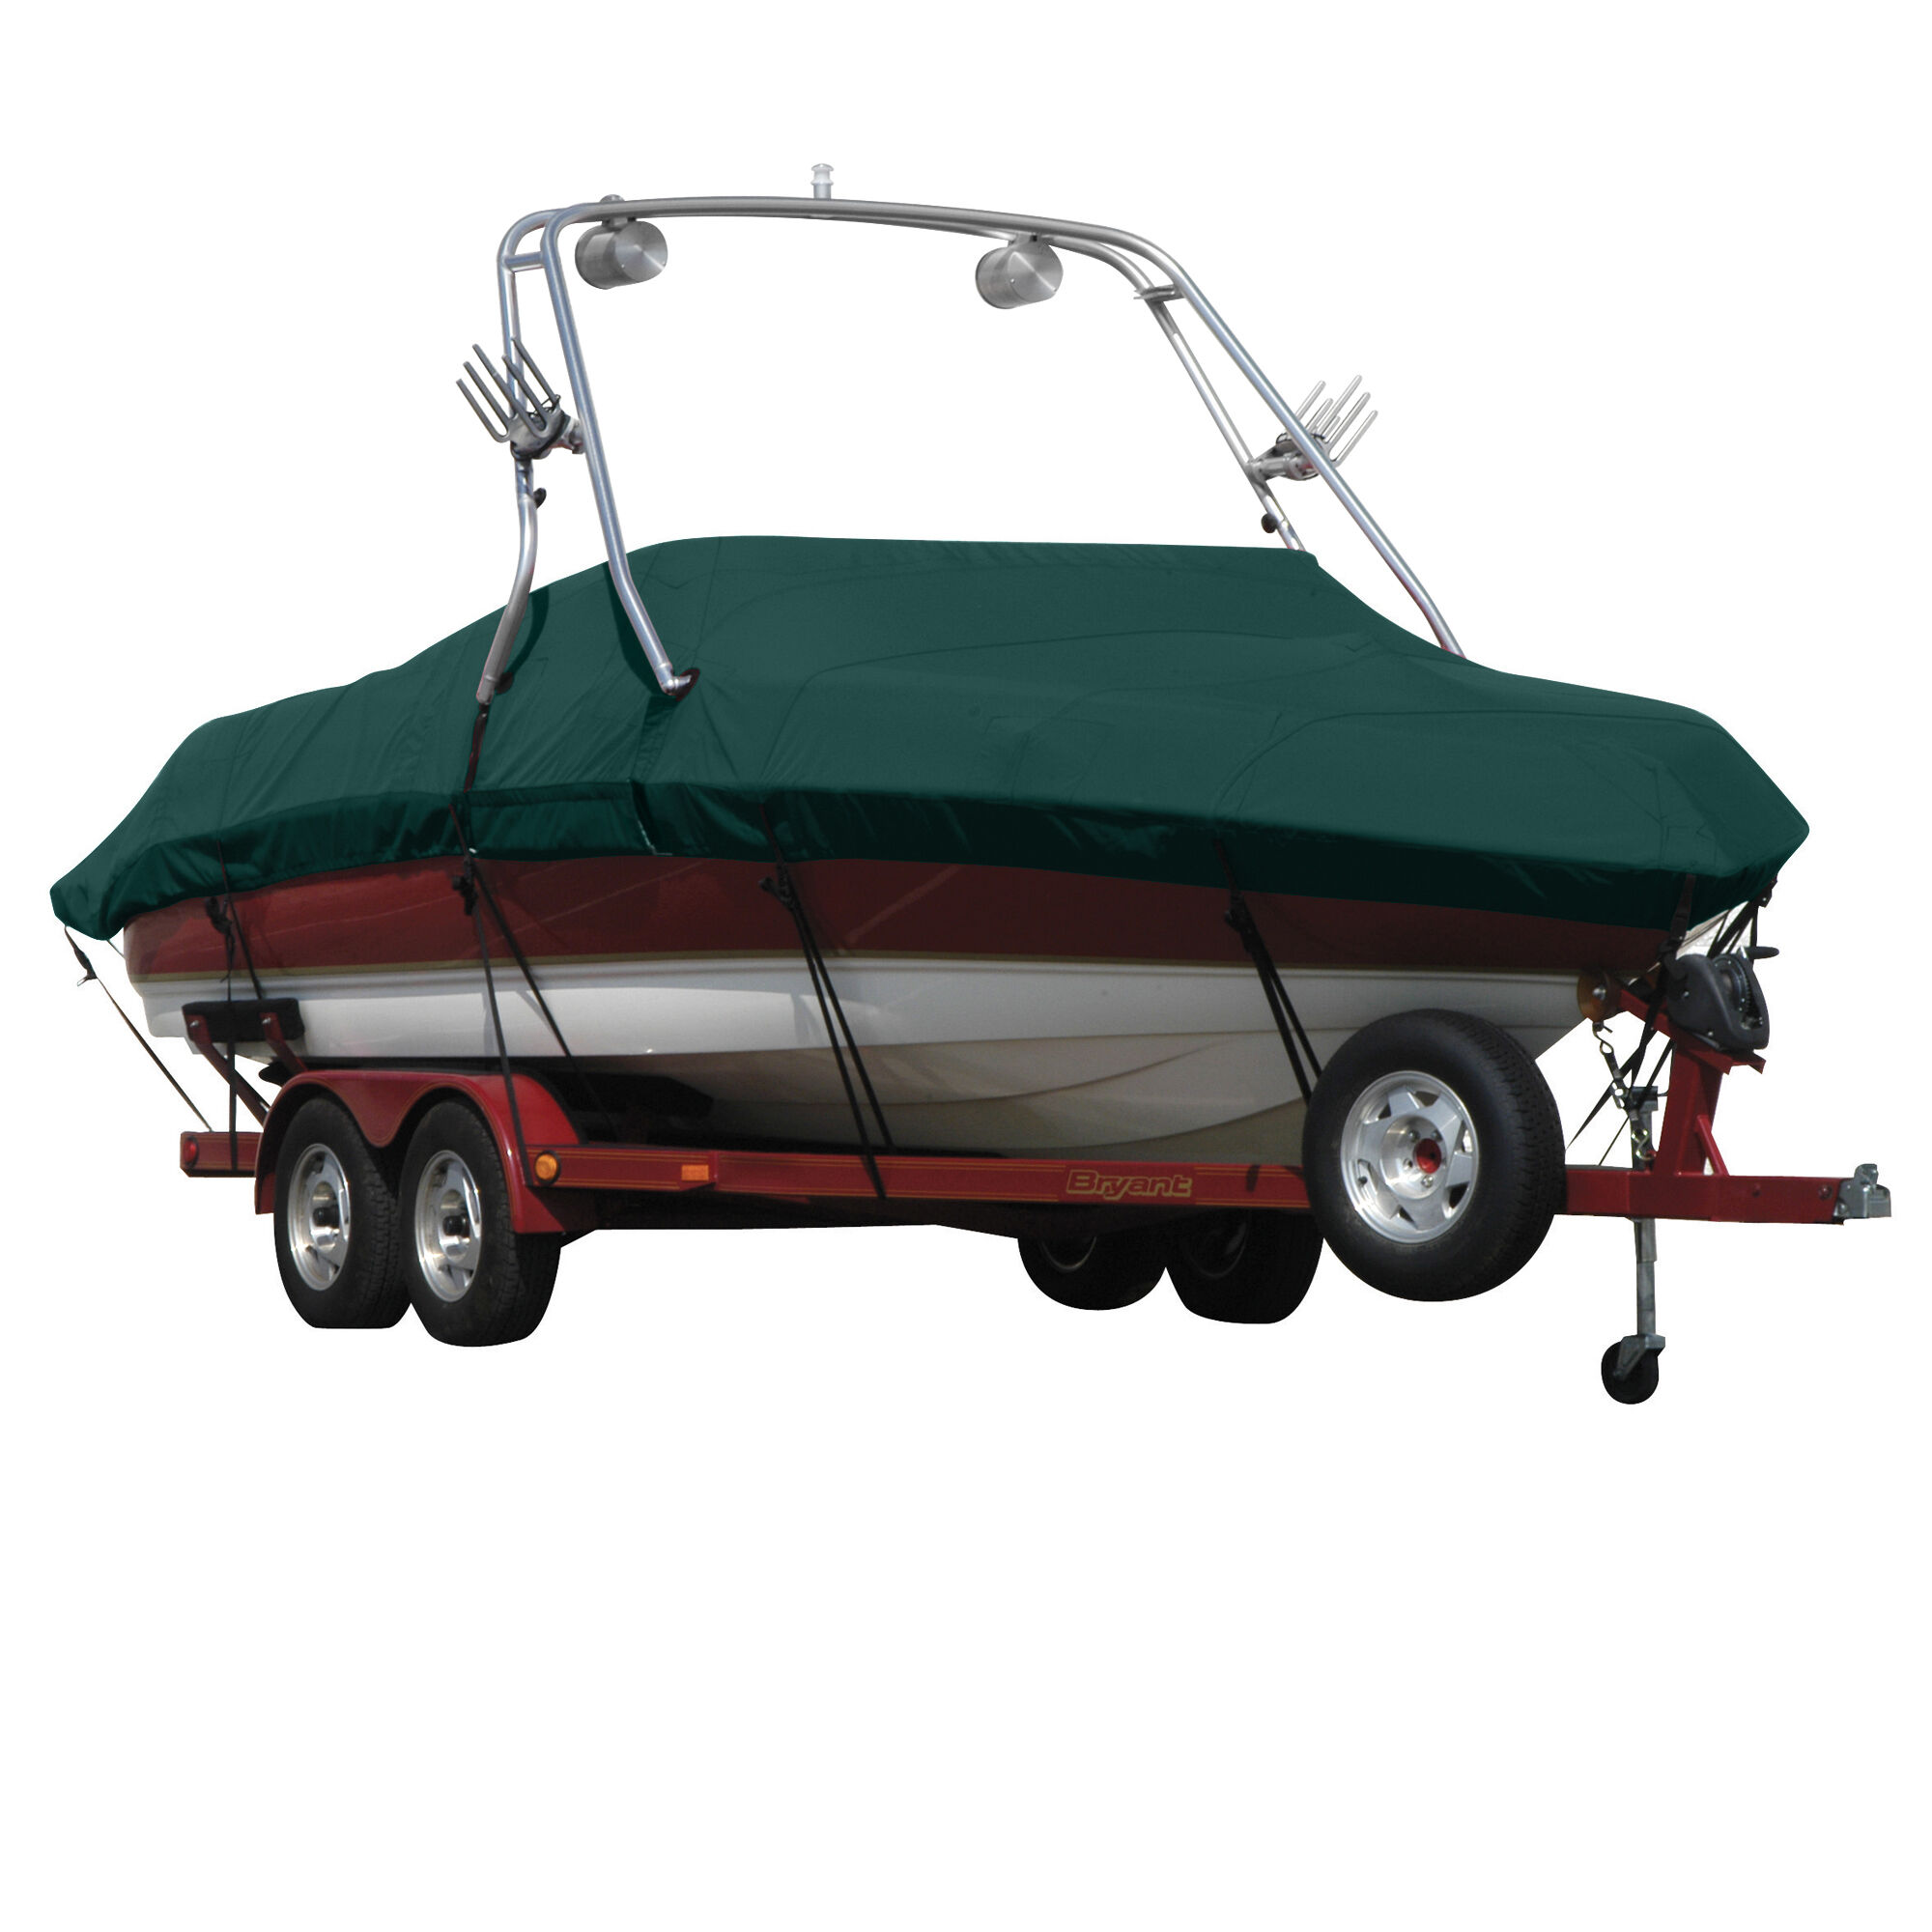 Covermate MALIBU RIDE 21 I ILLSN X TOWER DOES NOT Boat Cover in Forest Green